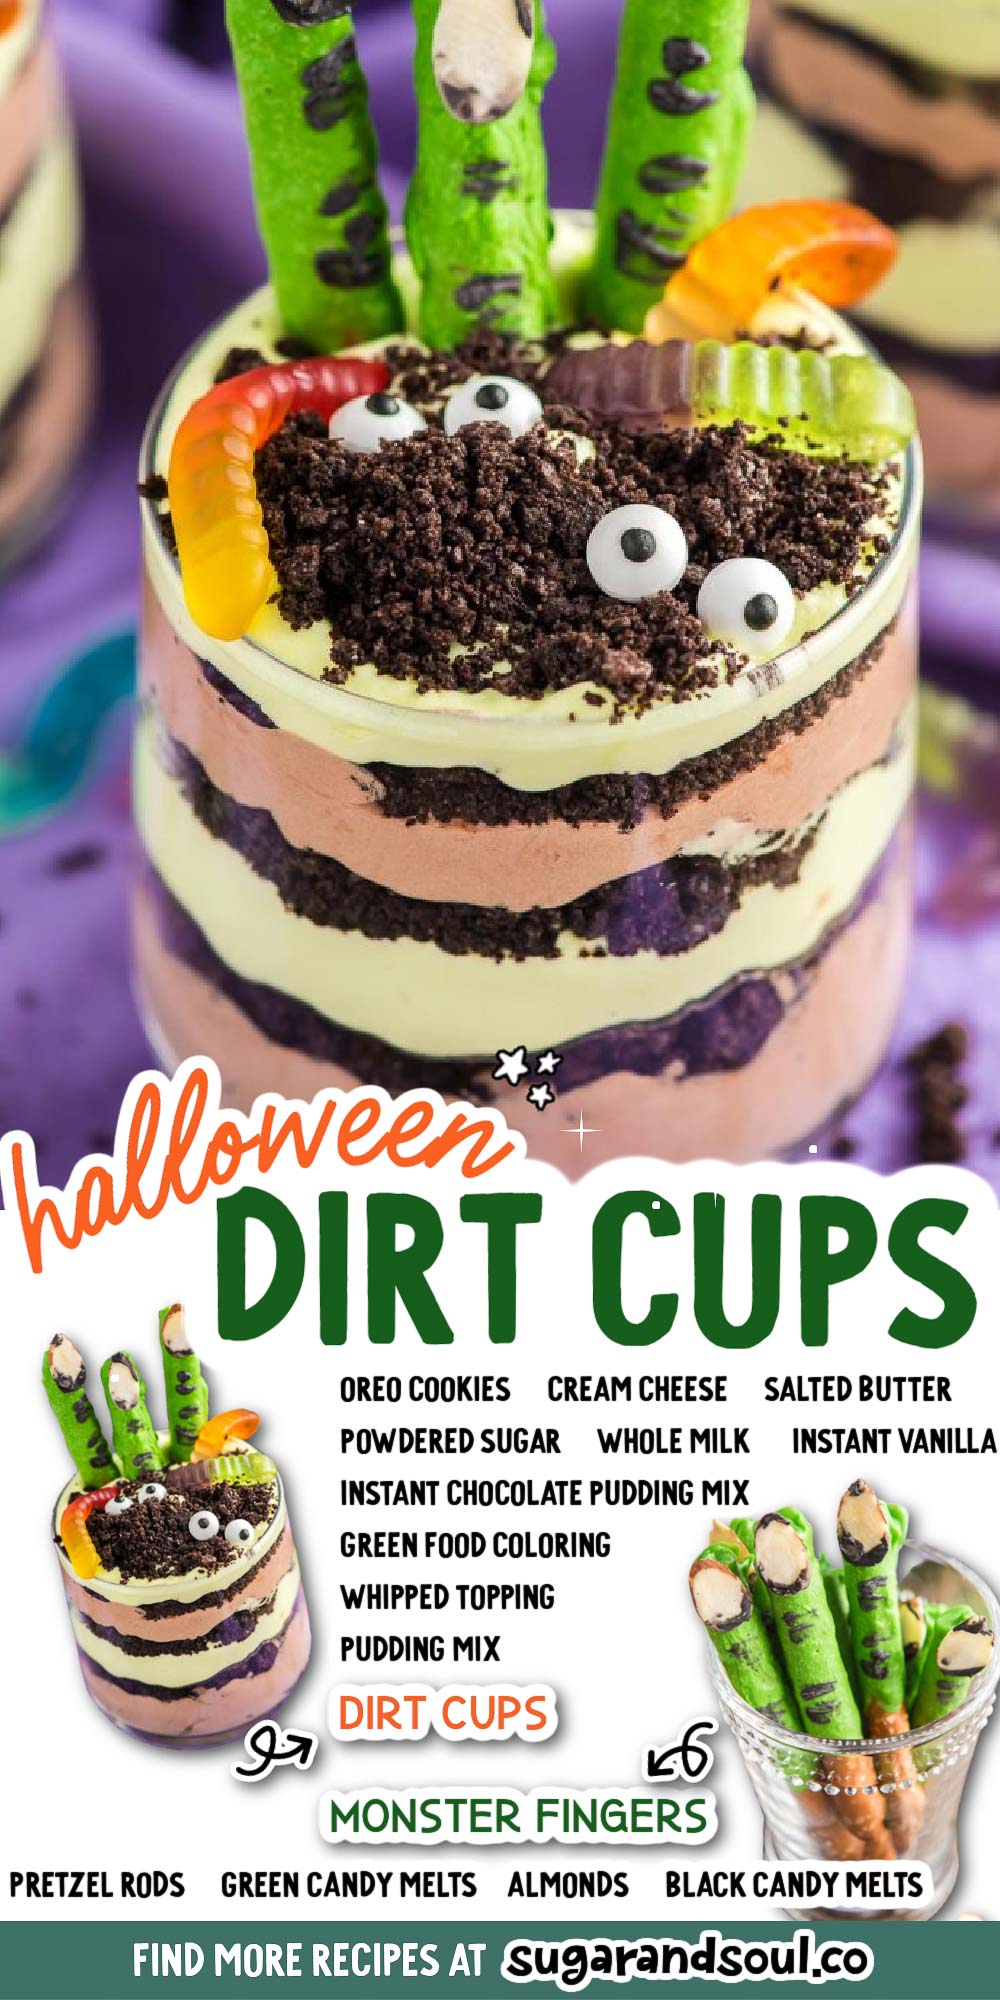 Halloween Dirt Cups look like overturned earth but taste heavenly! Creamy chocolate and vanilla layers are sprinkled with handfuls of crushed Oreo “dirt.” The finishing touches are chocolate pretzel “monster fingers,” gummy worms, and candy eyeballs! via @sugarandsoulco